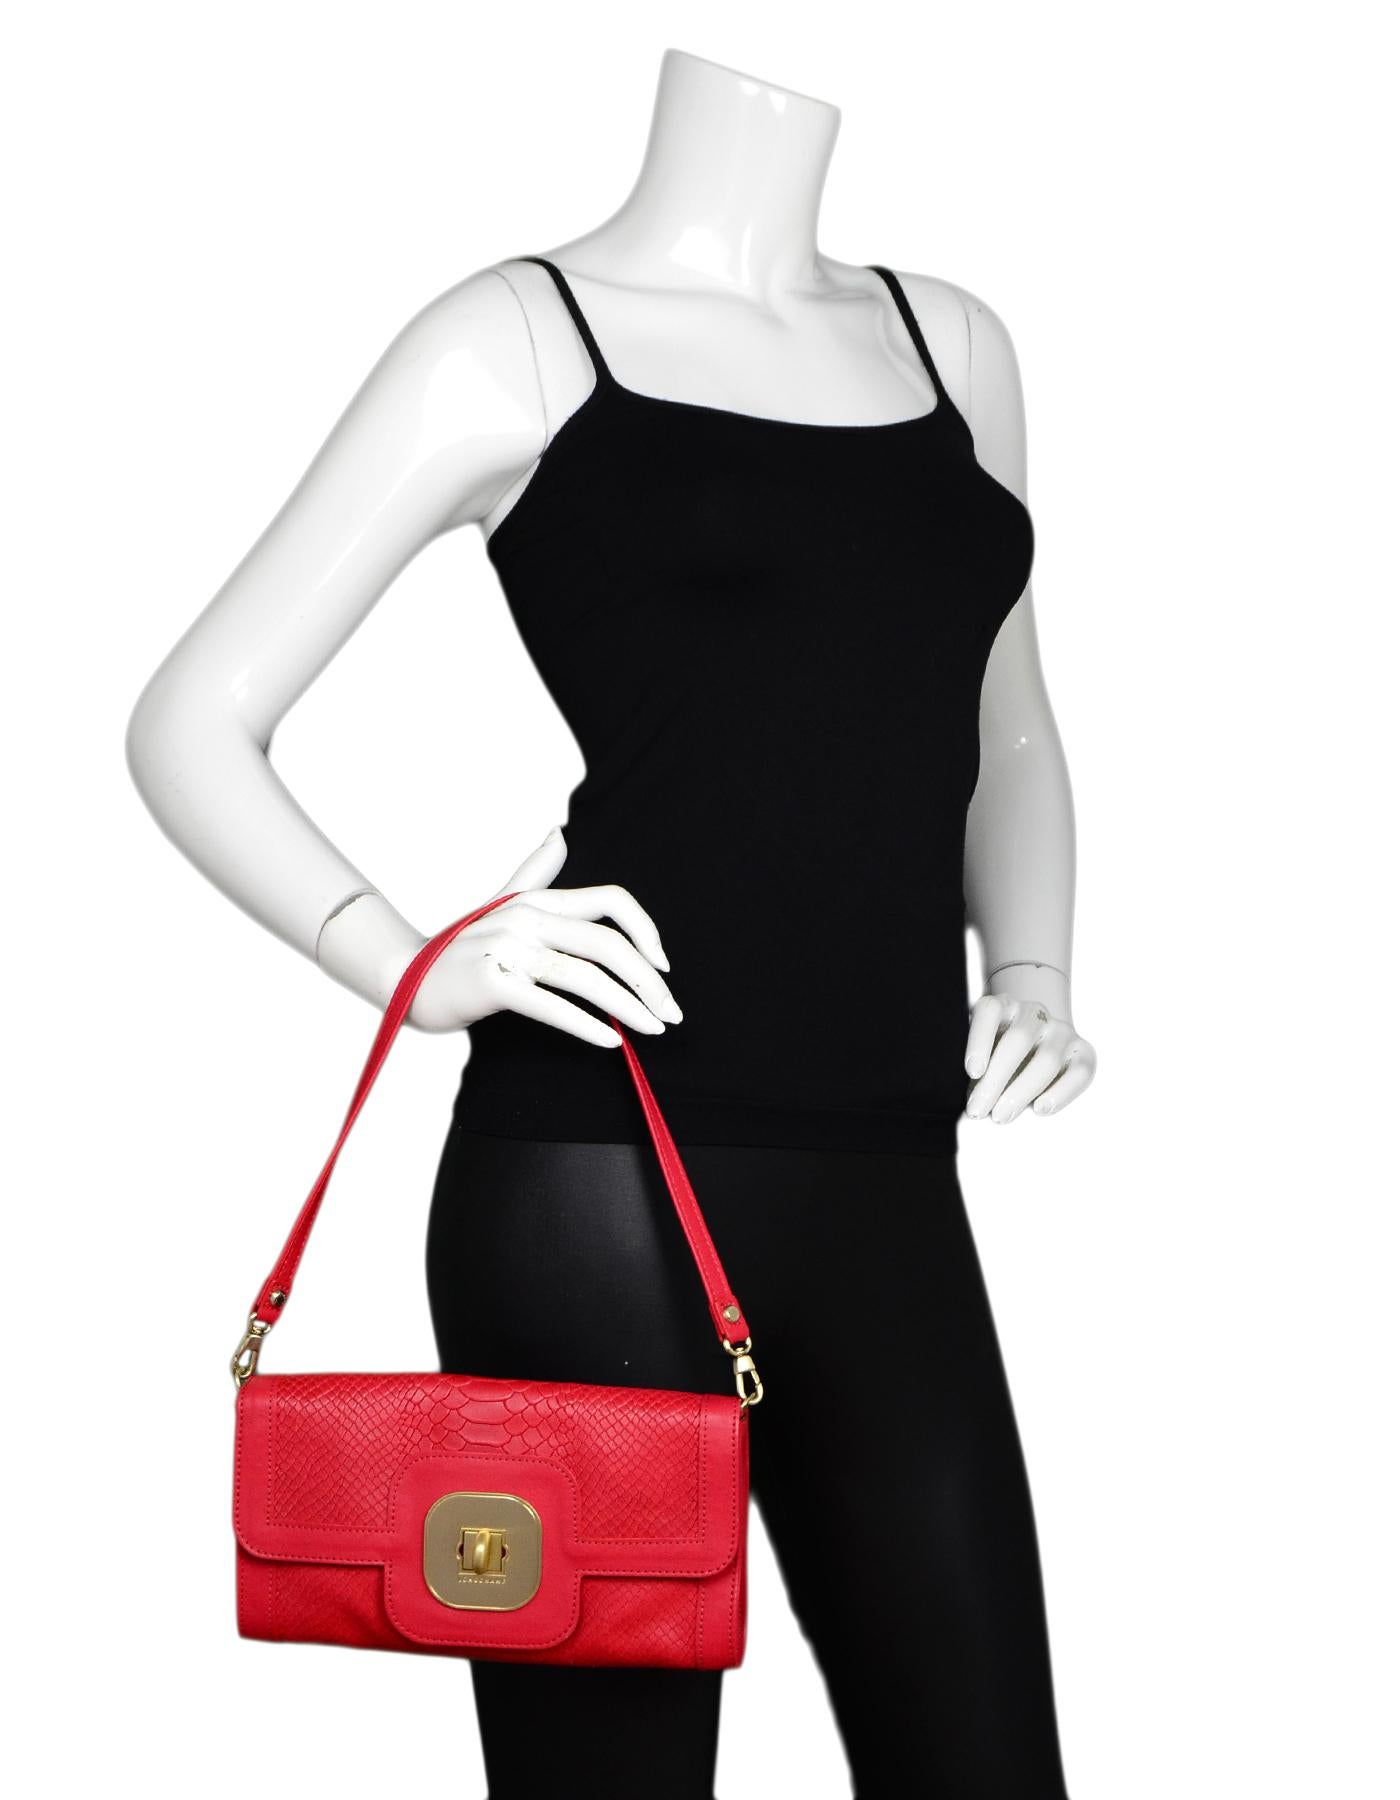 Longchamp Red Leather Embossed Snake Gatsby Flap Clutch/Shoulder Bag

Made In: France
Color: Red
Hardware: Goldtone
Materials: Embossed leather
Lining: Leopard satin textile
Closure/Opening: Flap top with twistlock
Exterior Pockets: None
Interior